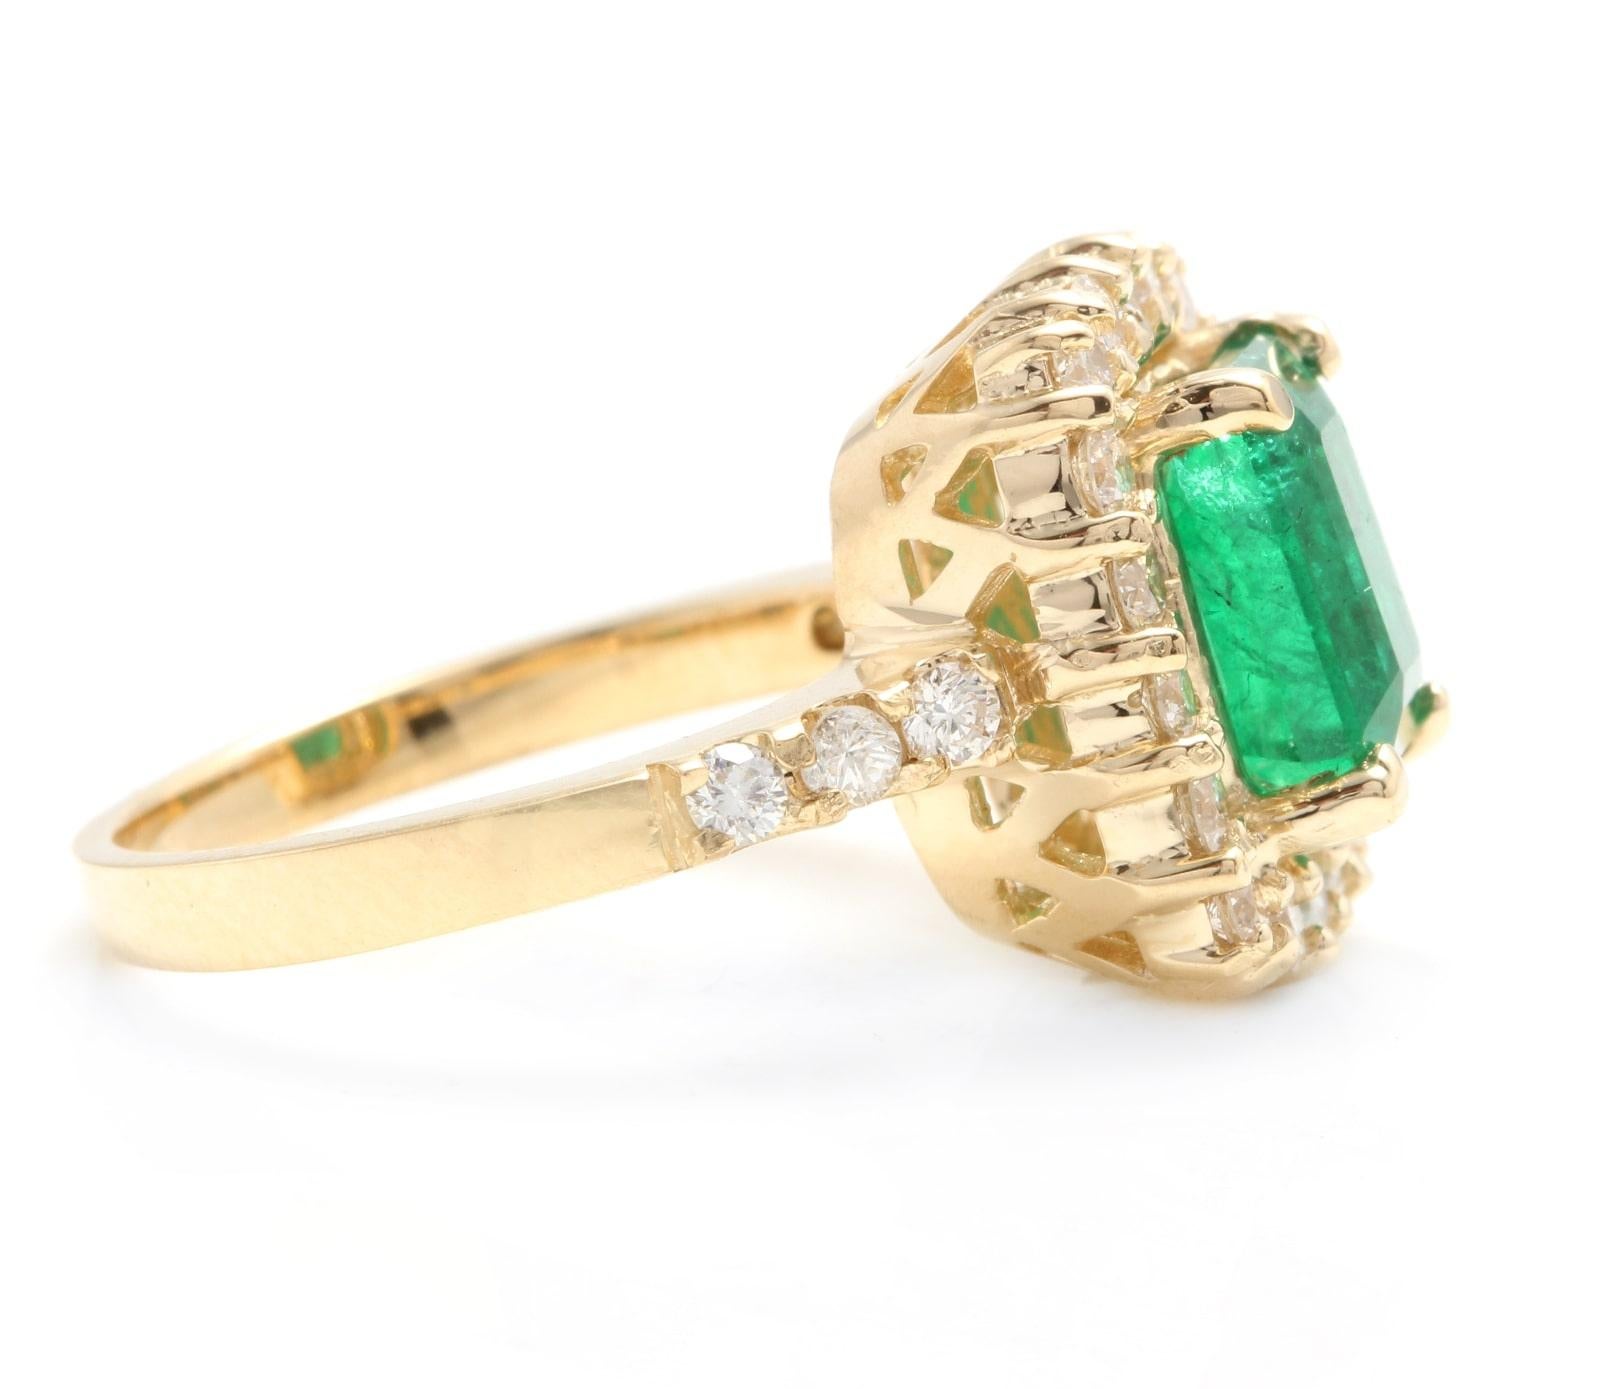 Emerald Cut 4.10 Carat Natural Emerald and Diamond 14 Karat Solid Yellow Gold Ring For Sale